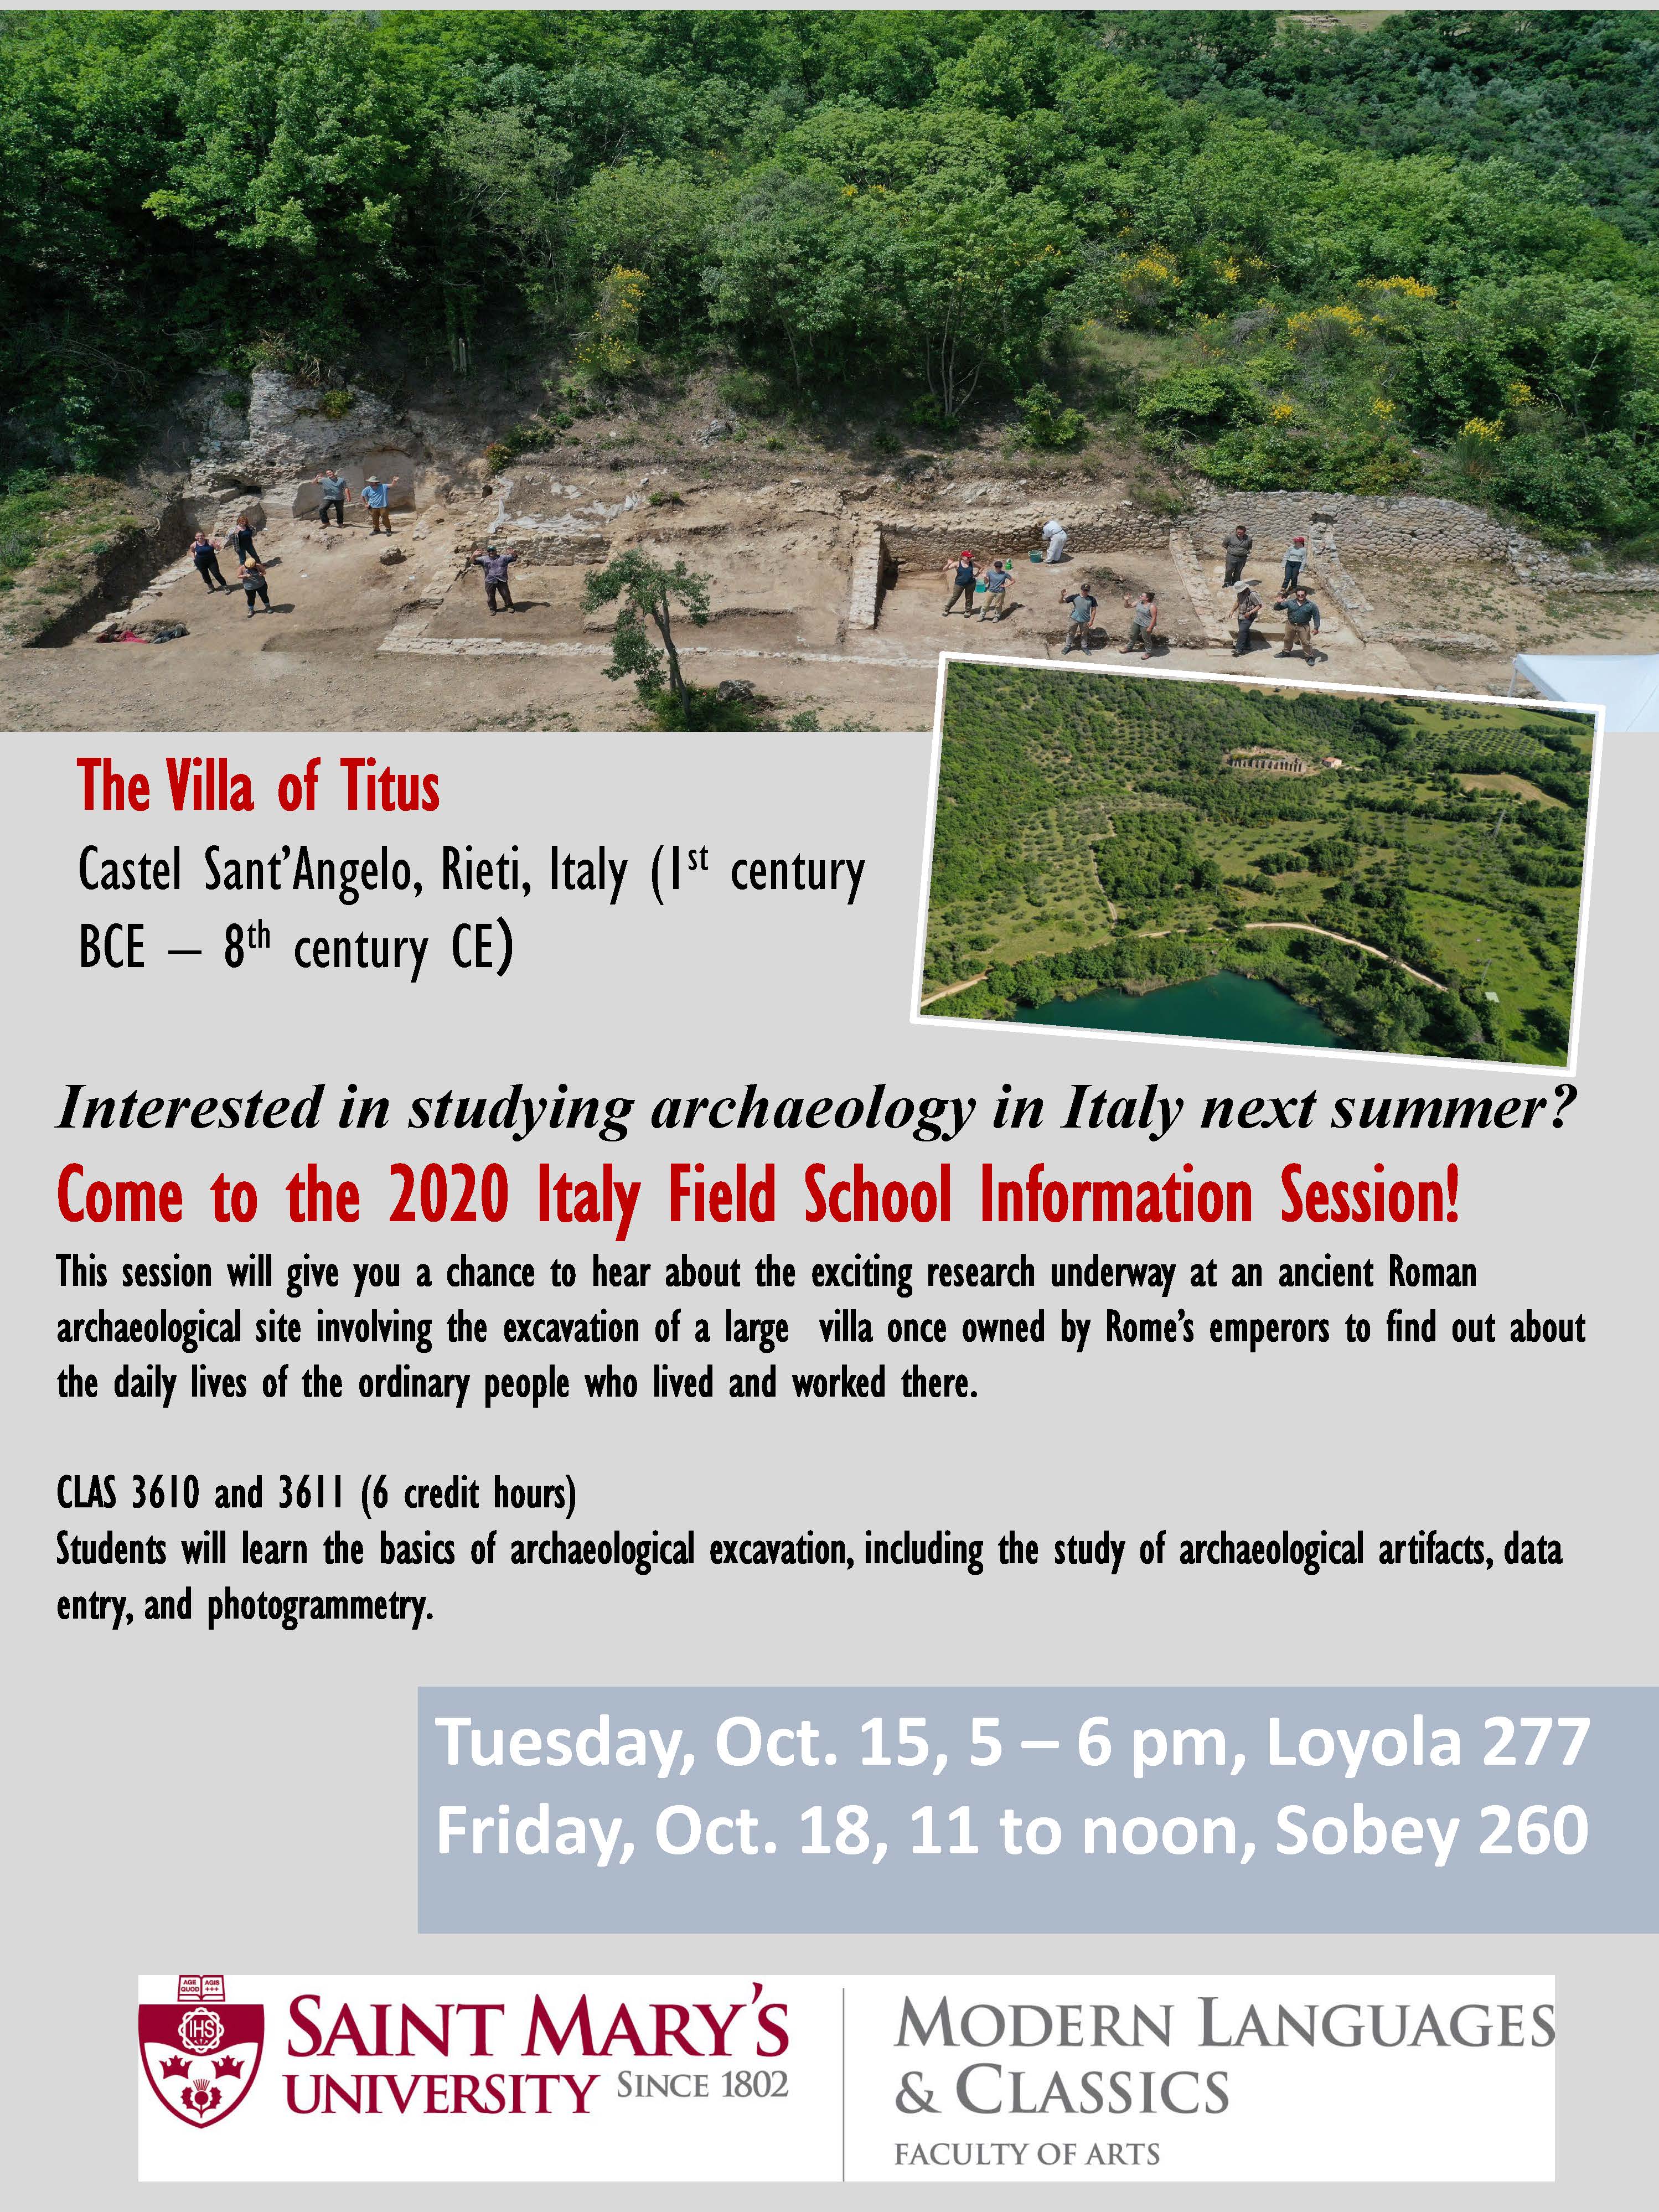 2020 Italy Field School Information Session